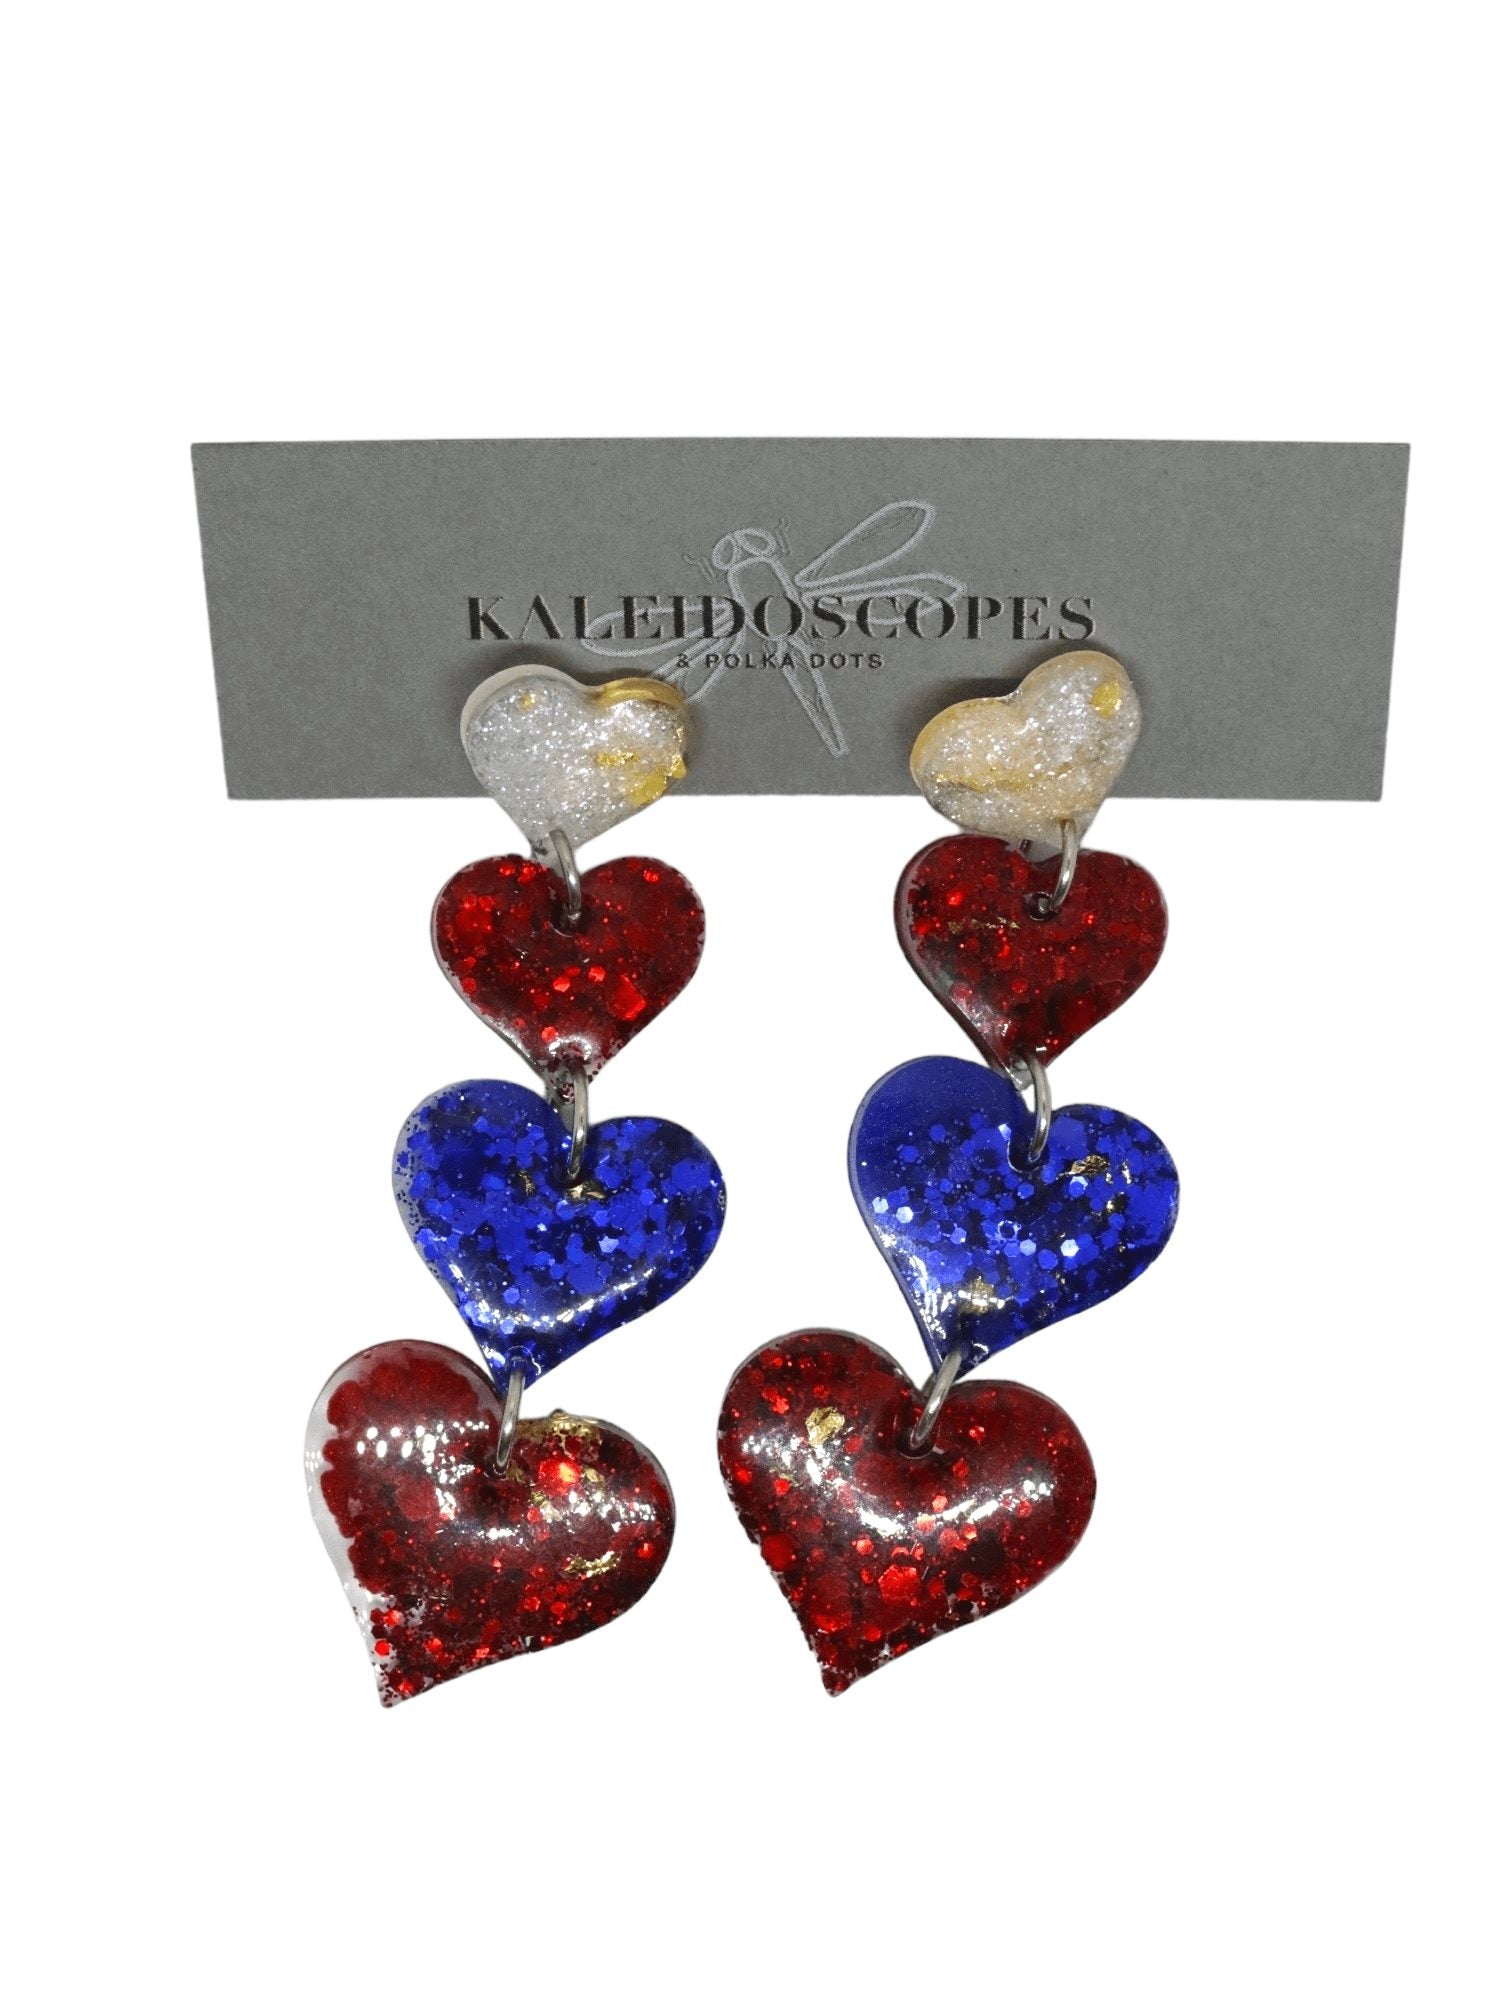 long-patriotic-heart-earrings---long-statement-stud-earrings---red-white-and-blue-glitter-jewelry---kaleidoscopes-and-polka-dots